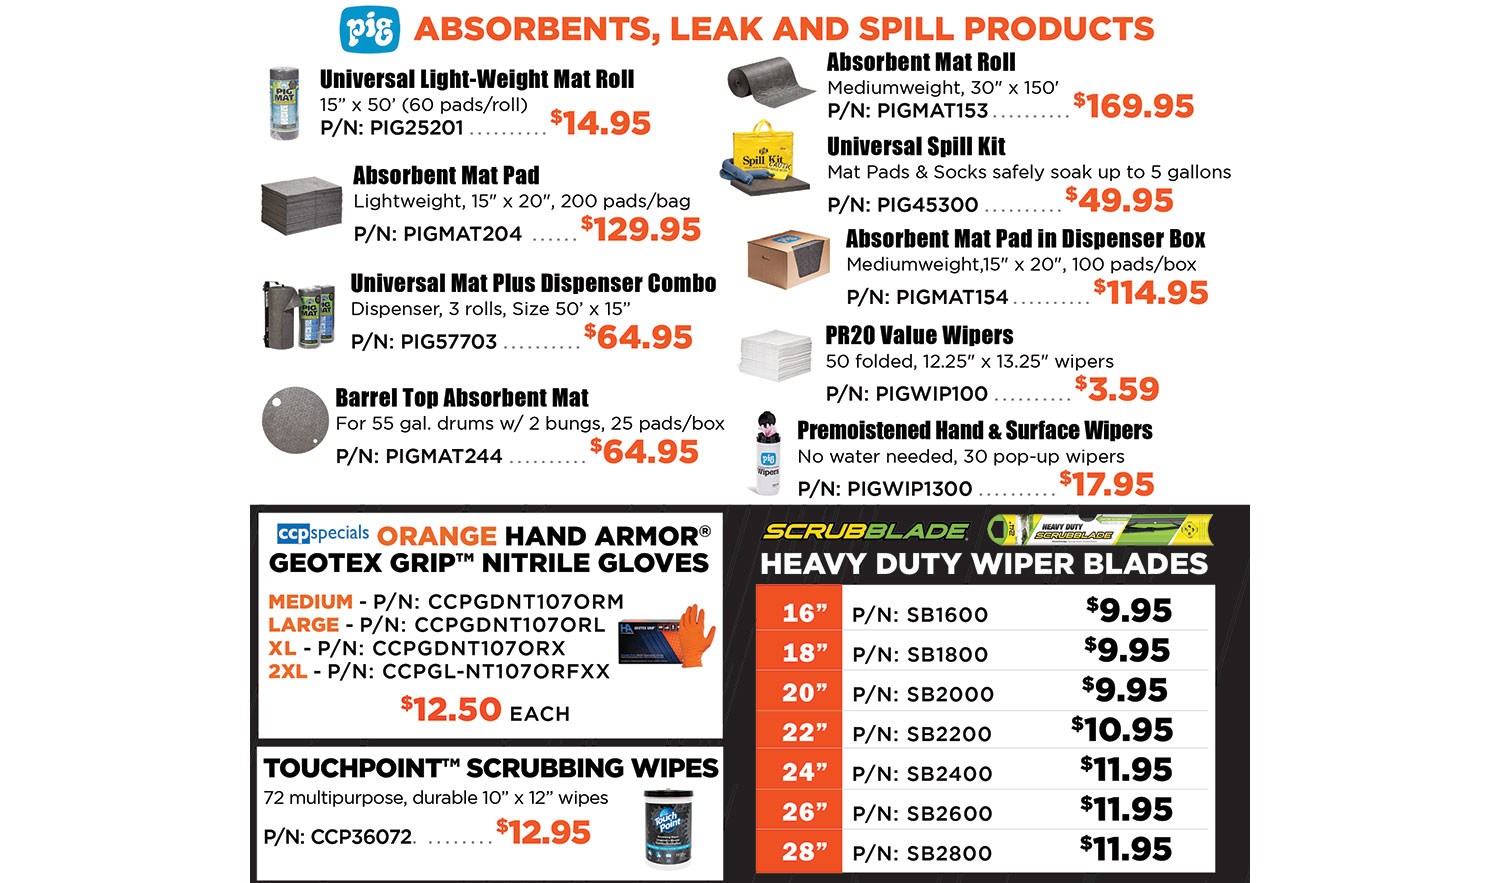 Save on Pig absorbents, leak and spill products, Hard Armor Nitrile Gloves, heavy duty wiper …